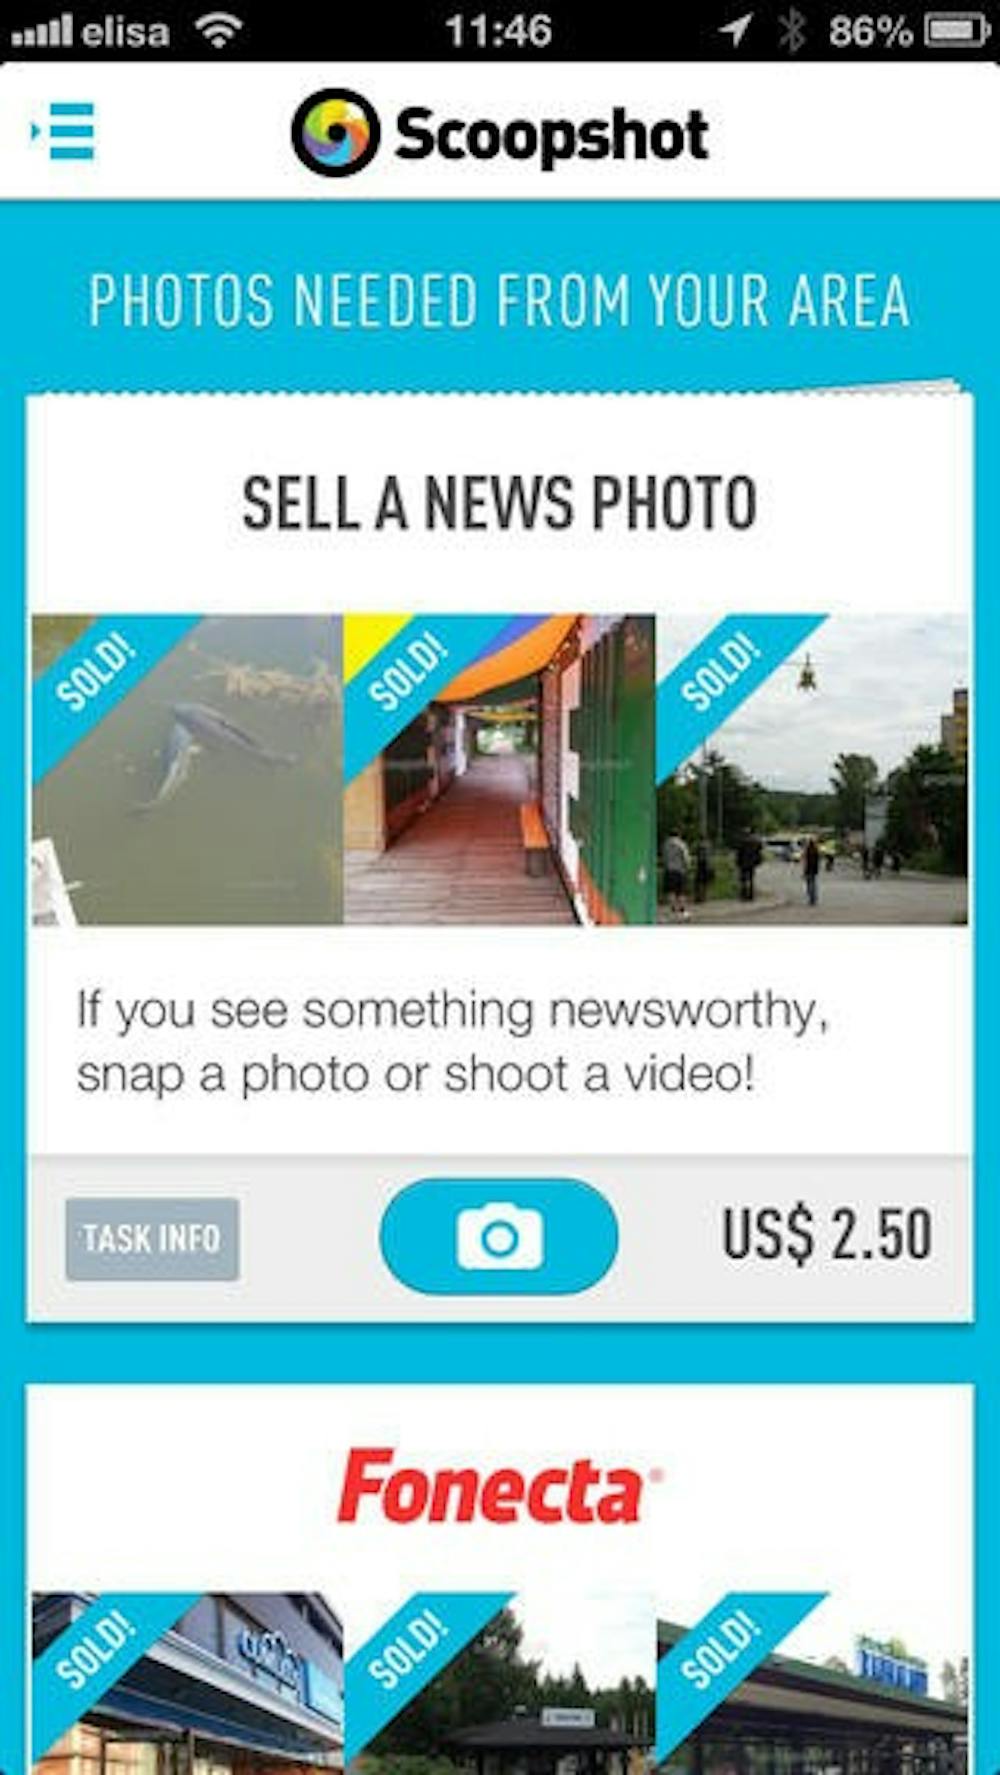 <p><strong>Scoopshot </strong>explores the world of freelance photography for regular smartphone users to sell their images to Scoopshot's clients, the majority being media organizations. The photographs go through filters to insure their authenticity. <strong>PHOTO COURTESY OF SCOOPSHOT</strong></p>